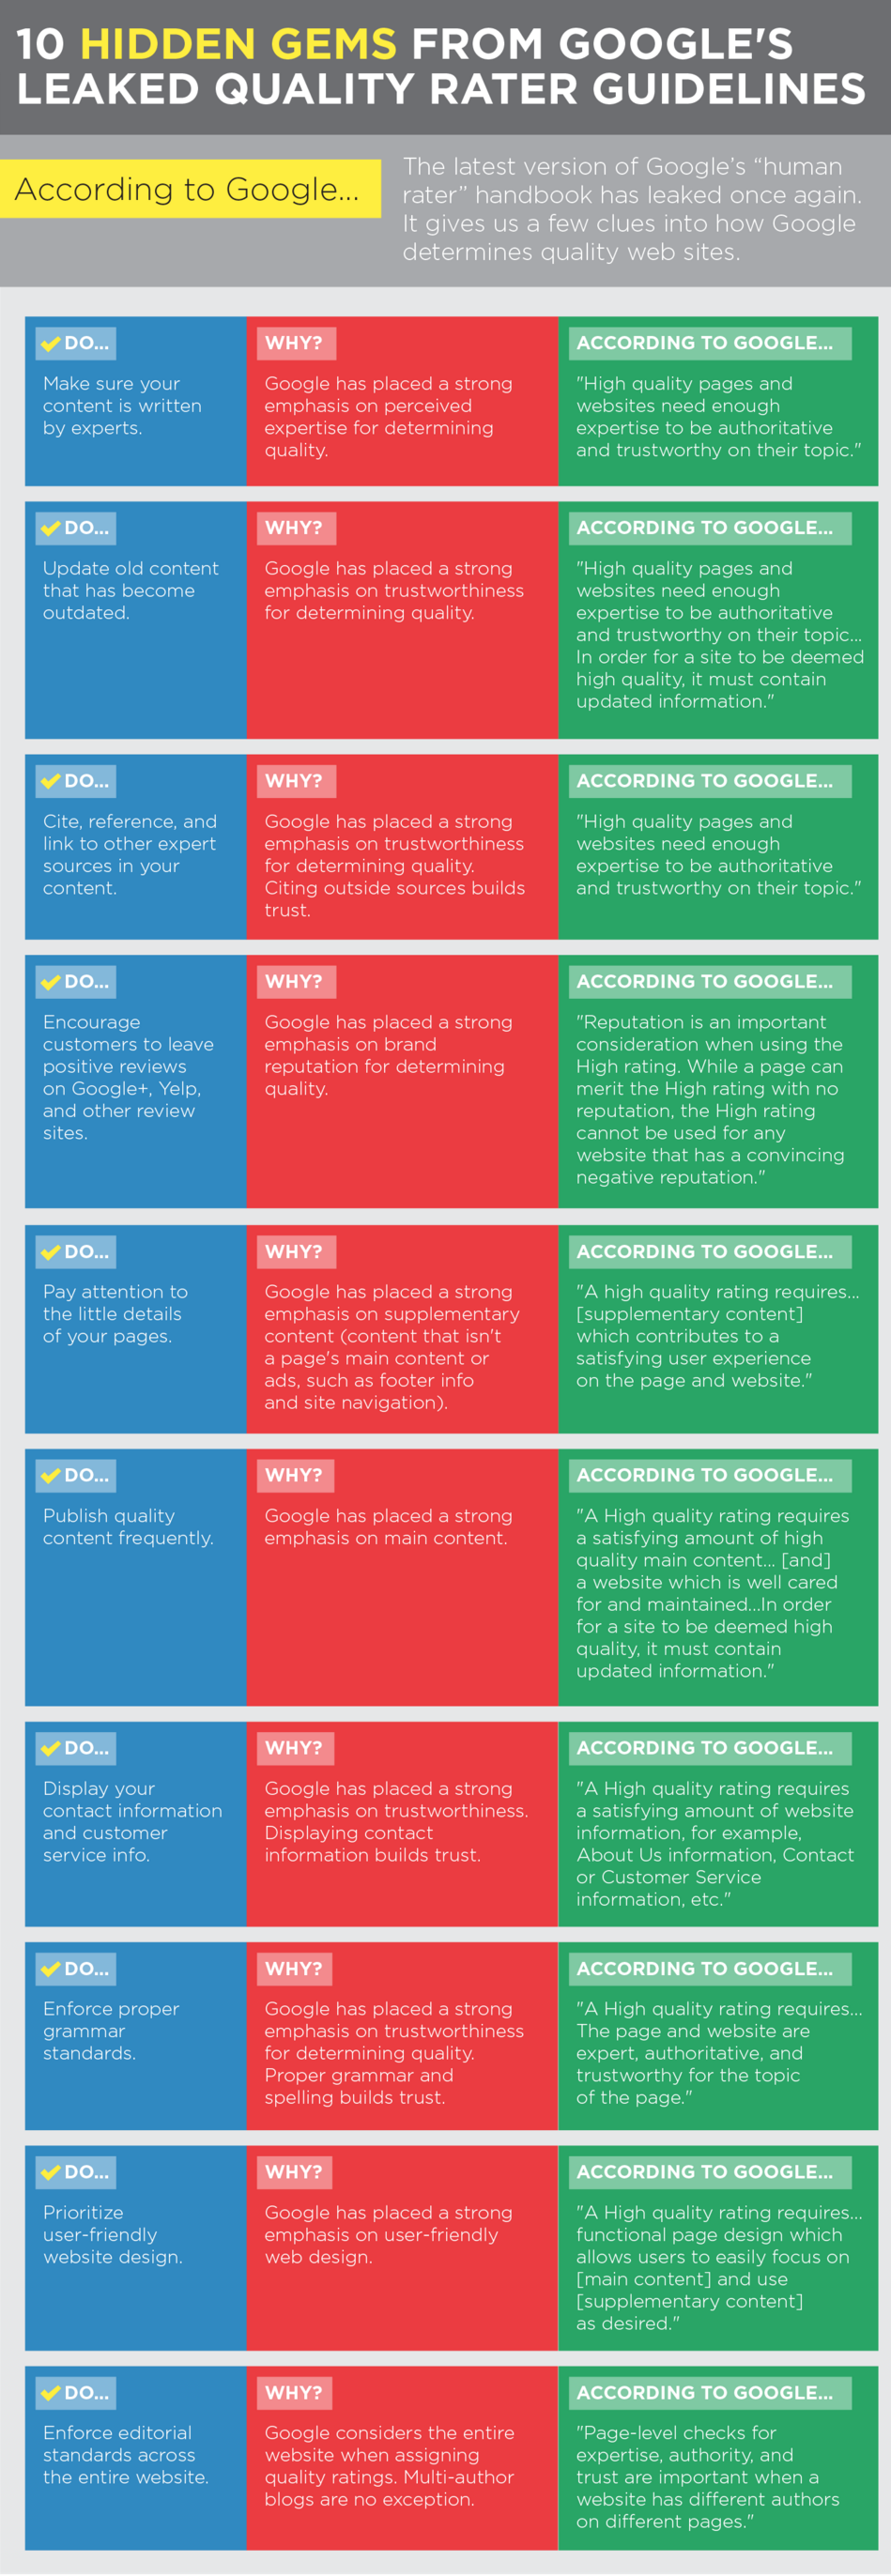 2015-google-search-quality-rating-guidelines-infographic